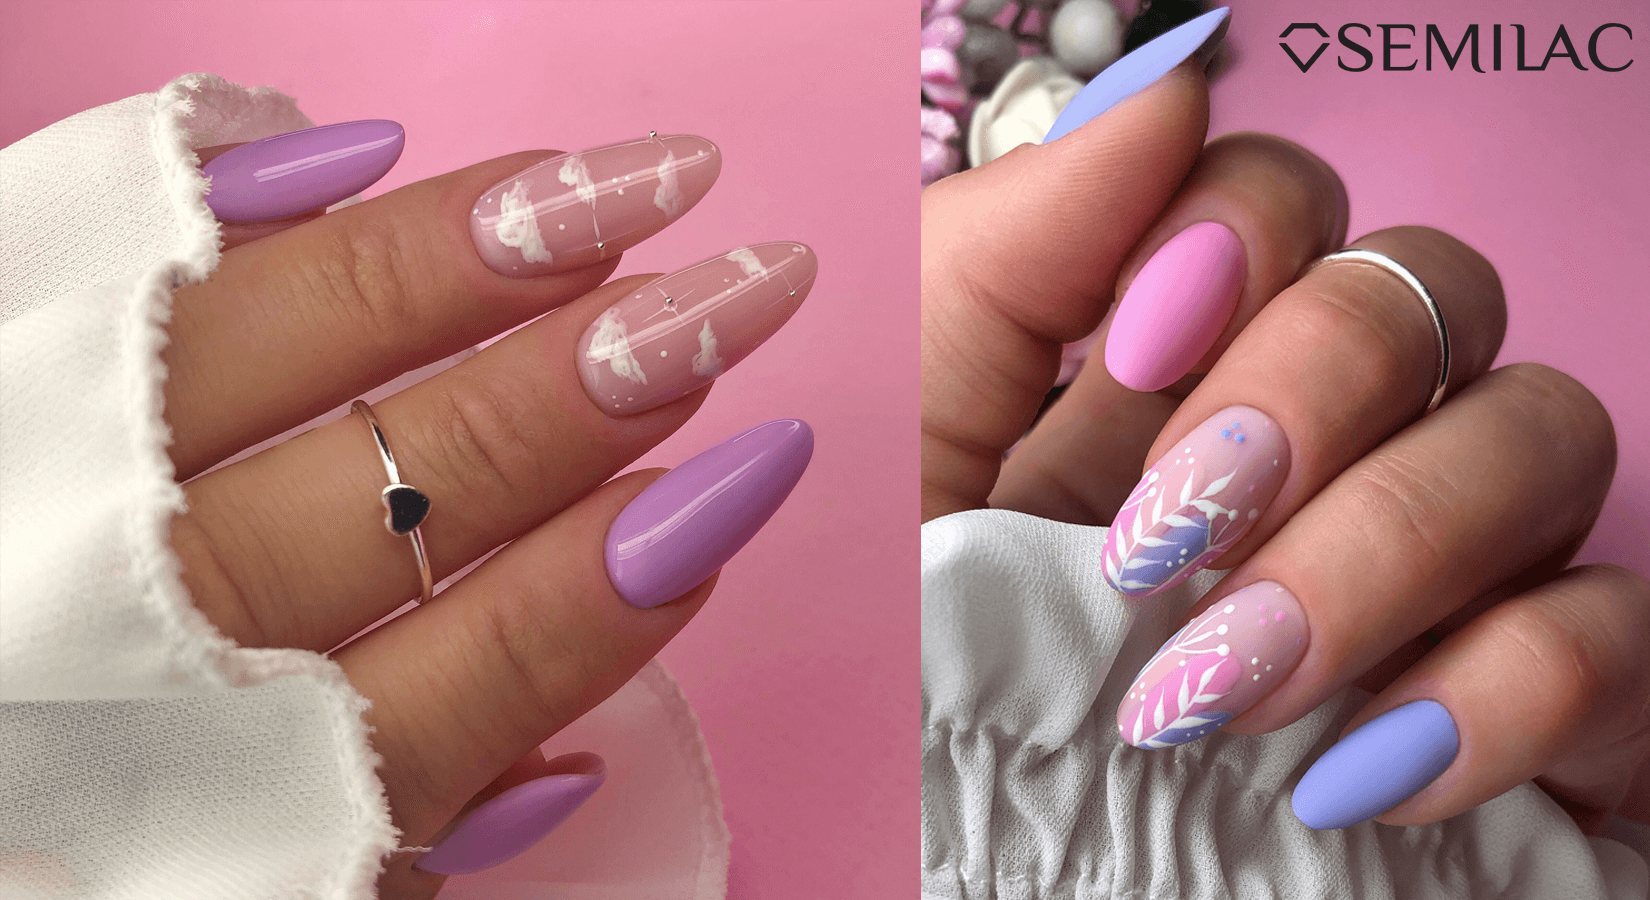 Fashionable 3D nail decorations - how to do it?